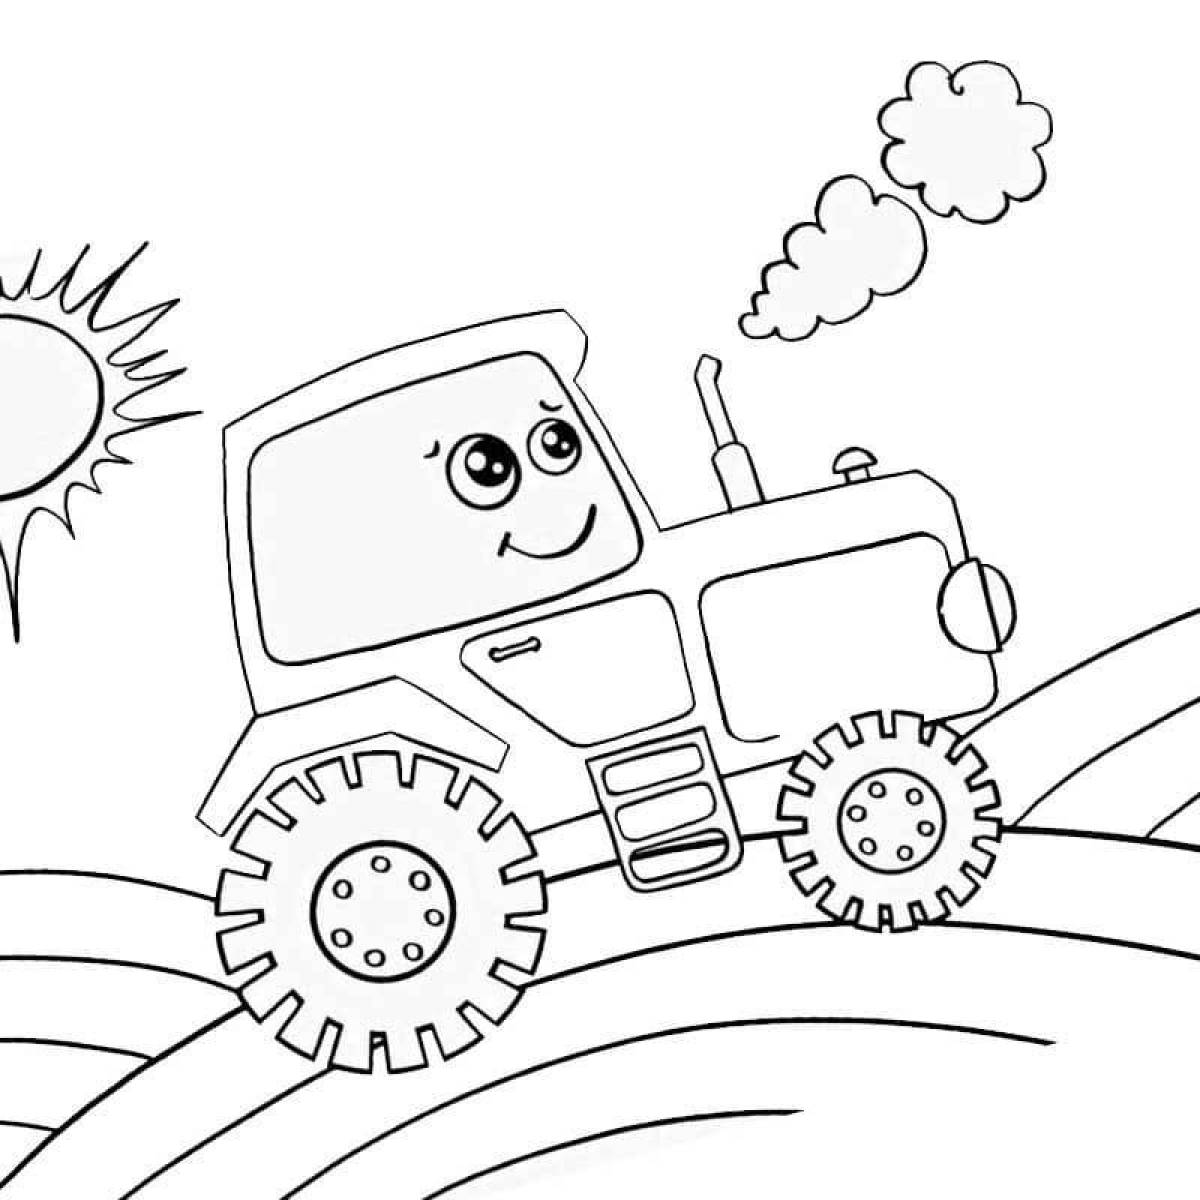 Gorgeous blue tractor coloring book for preschoolers 2-3 years old